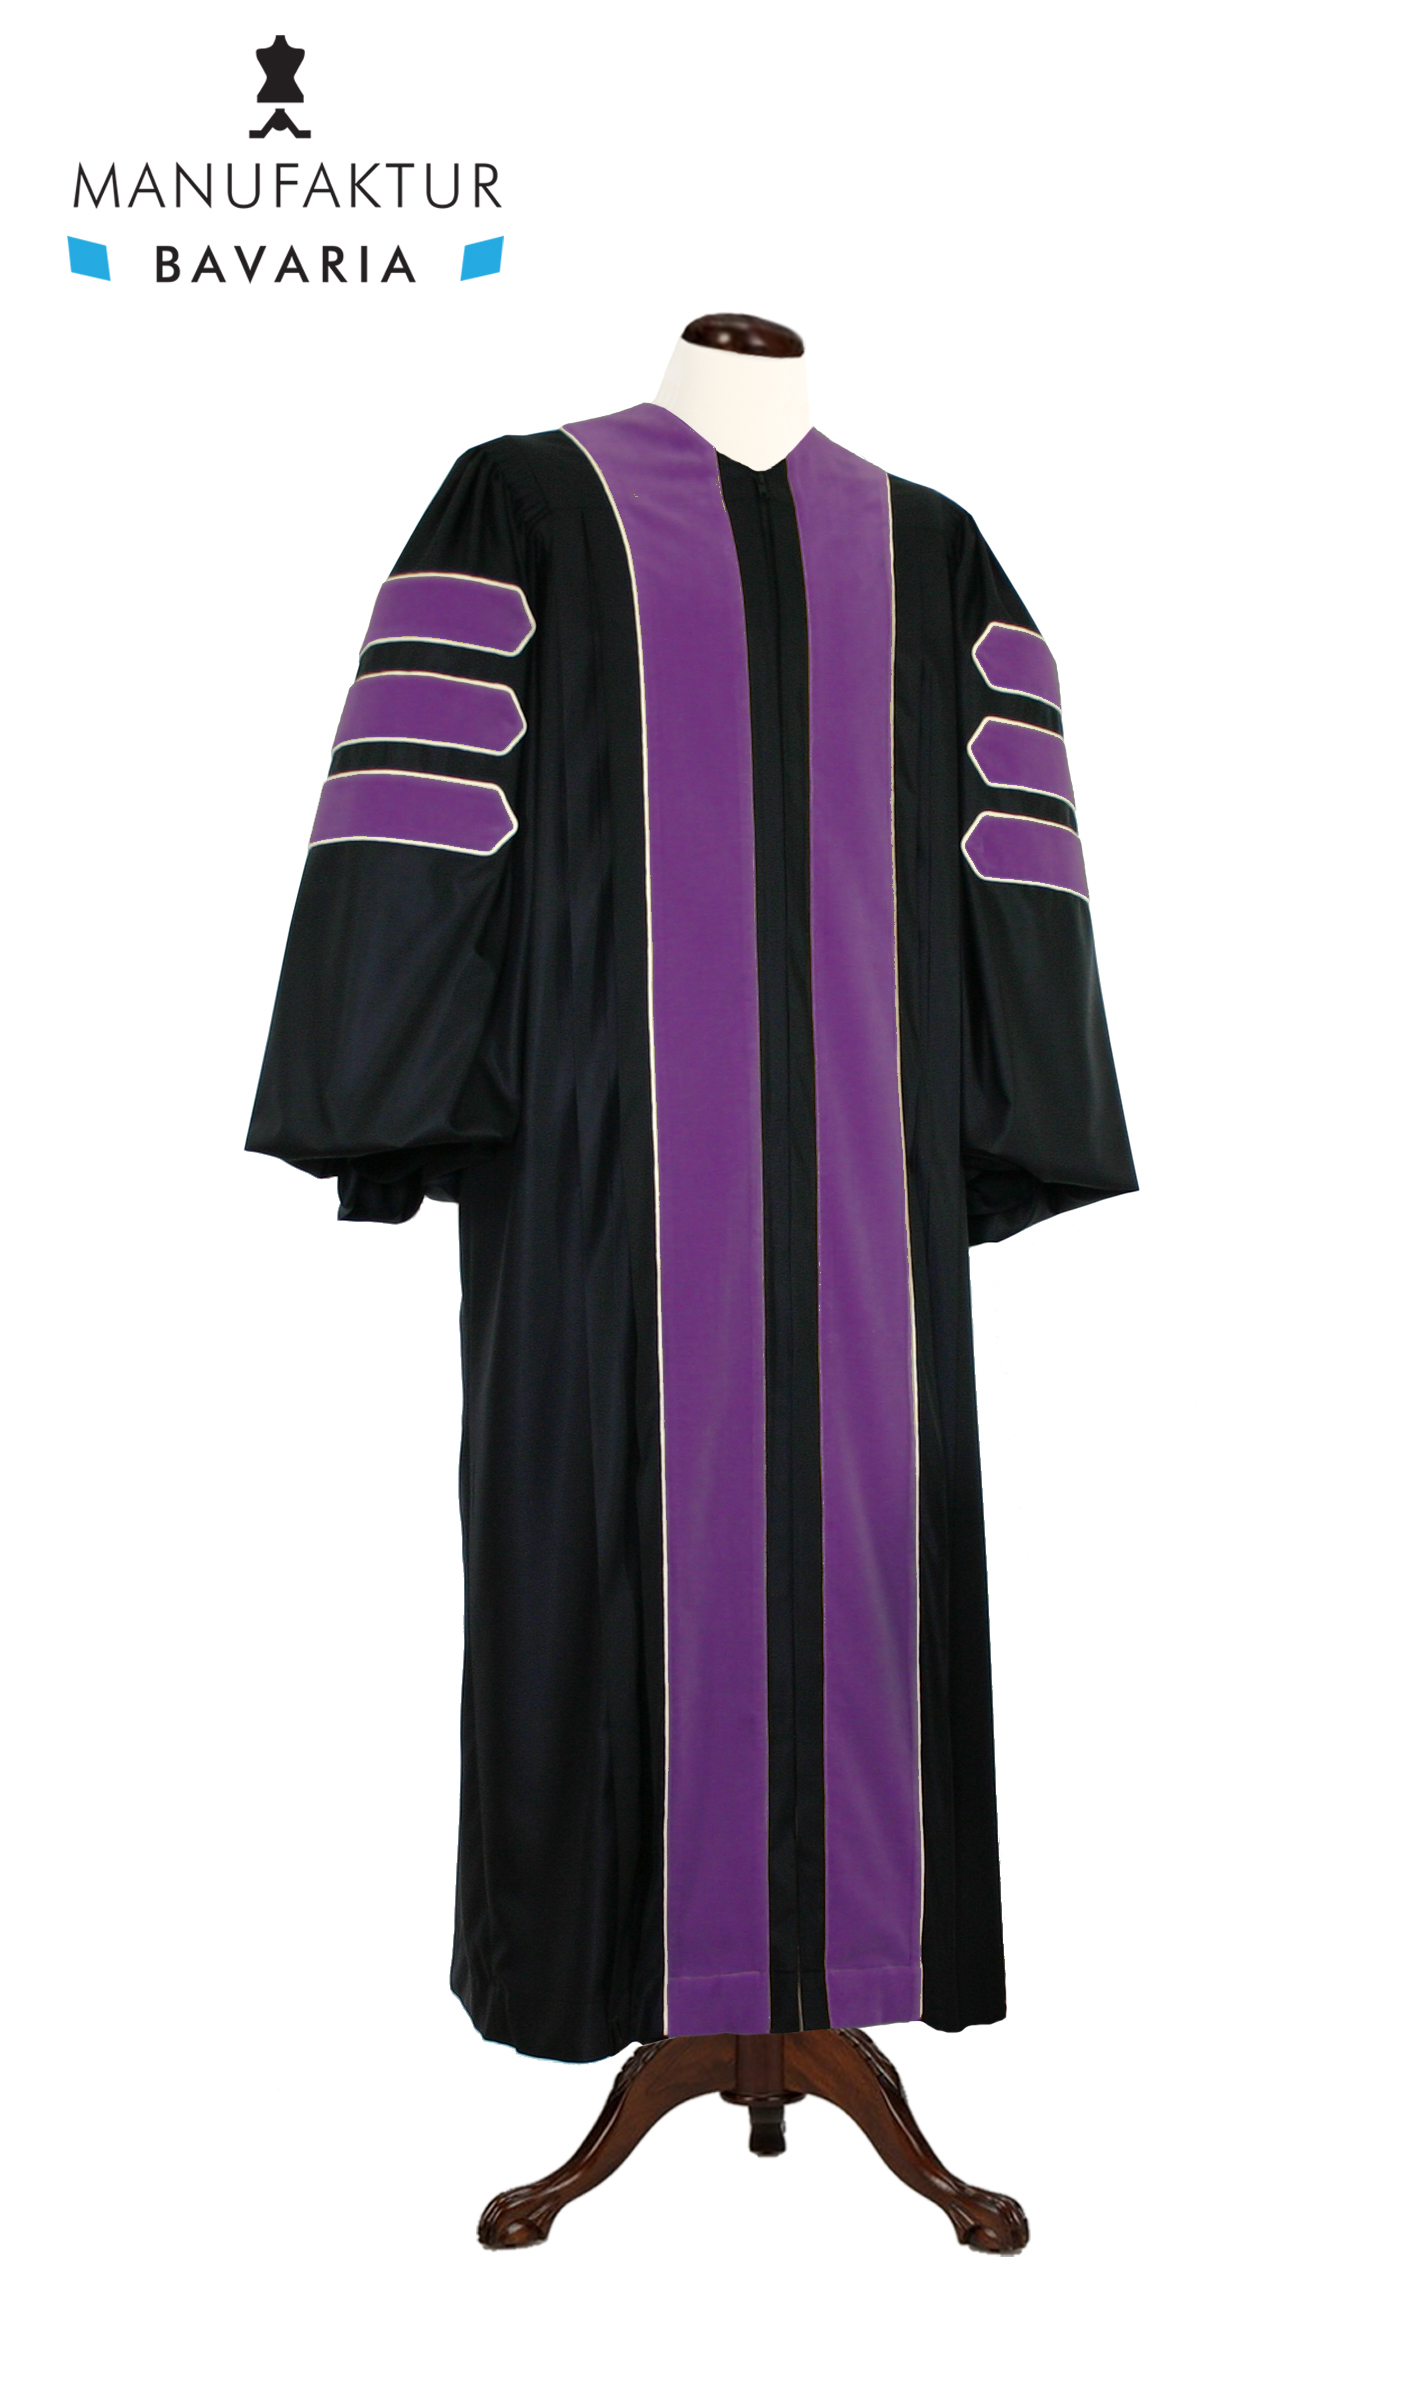 Deluxe Doctoral of Law Academic Gown for faculty and Ph.D